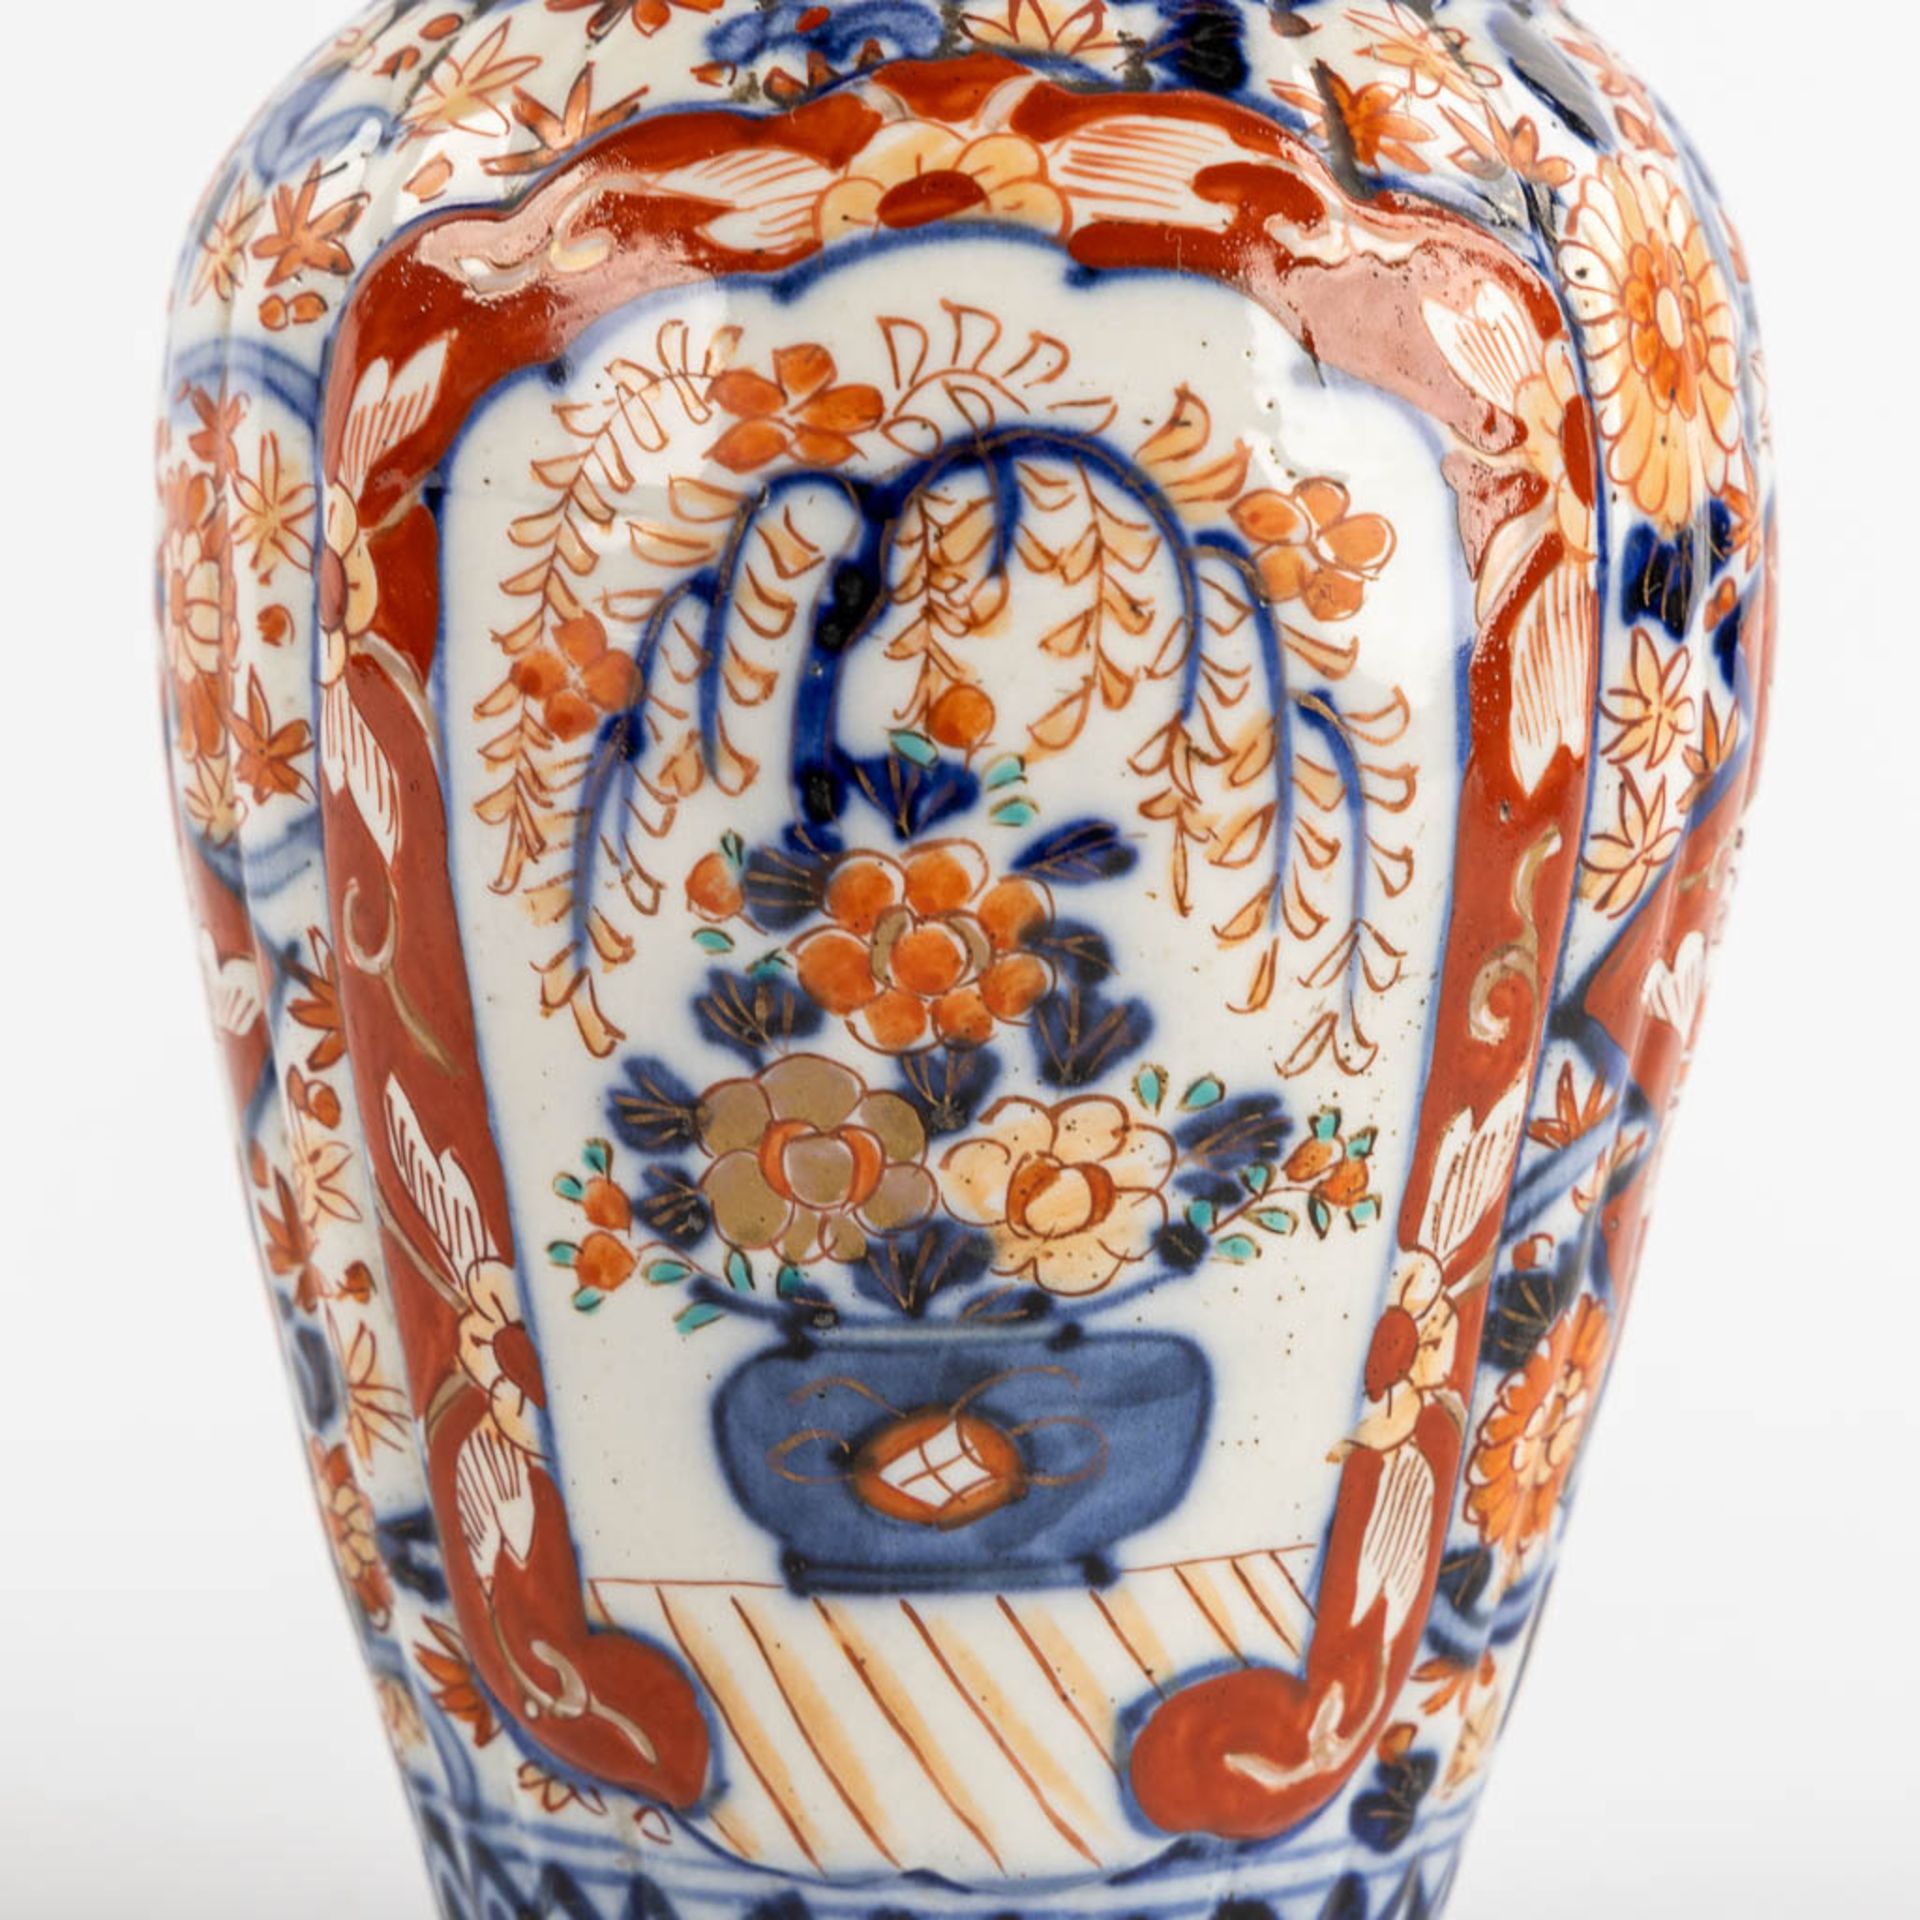 A pair of vases and a bowl, Japanese Imari porcelain. (H:25 x D:14 cm) - Image 9 of 11